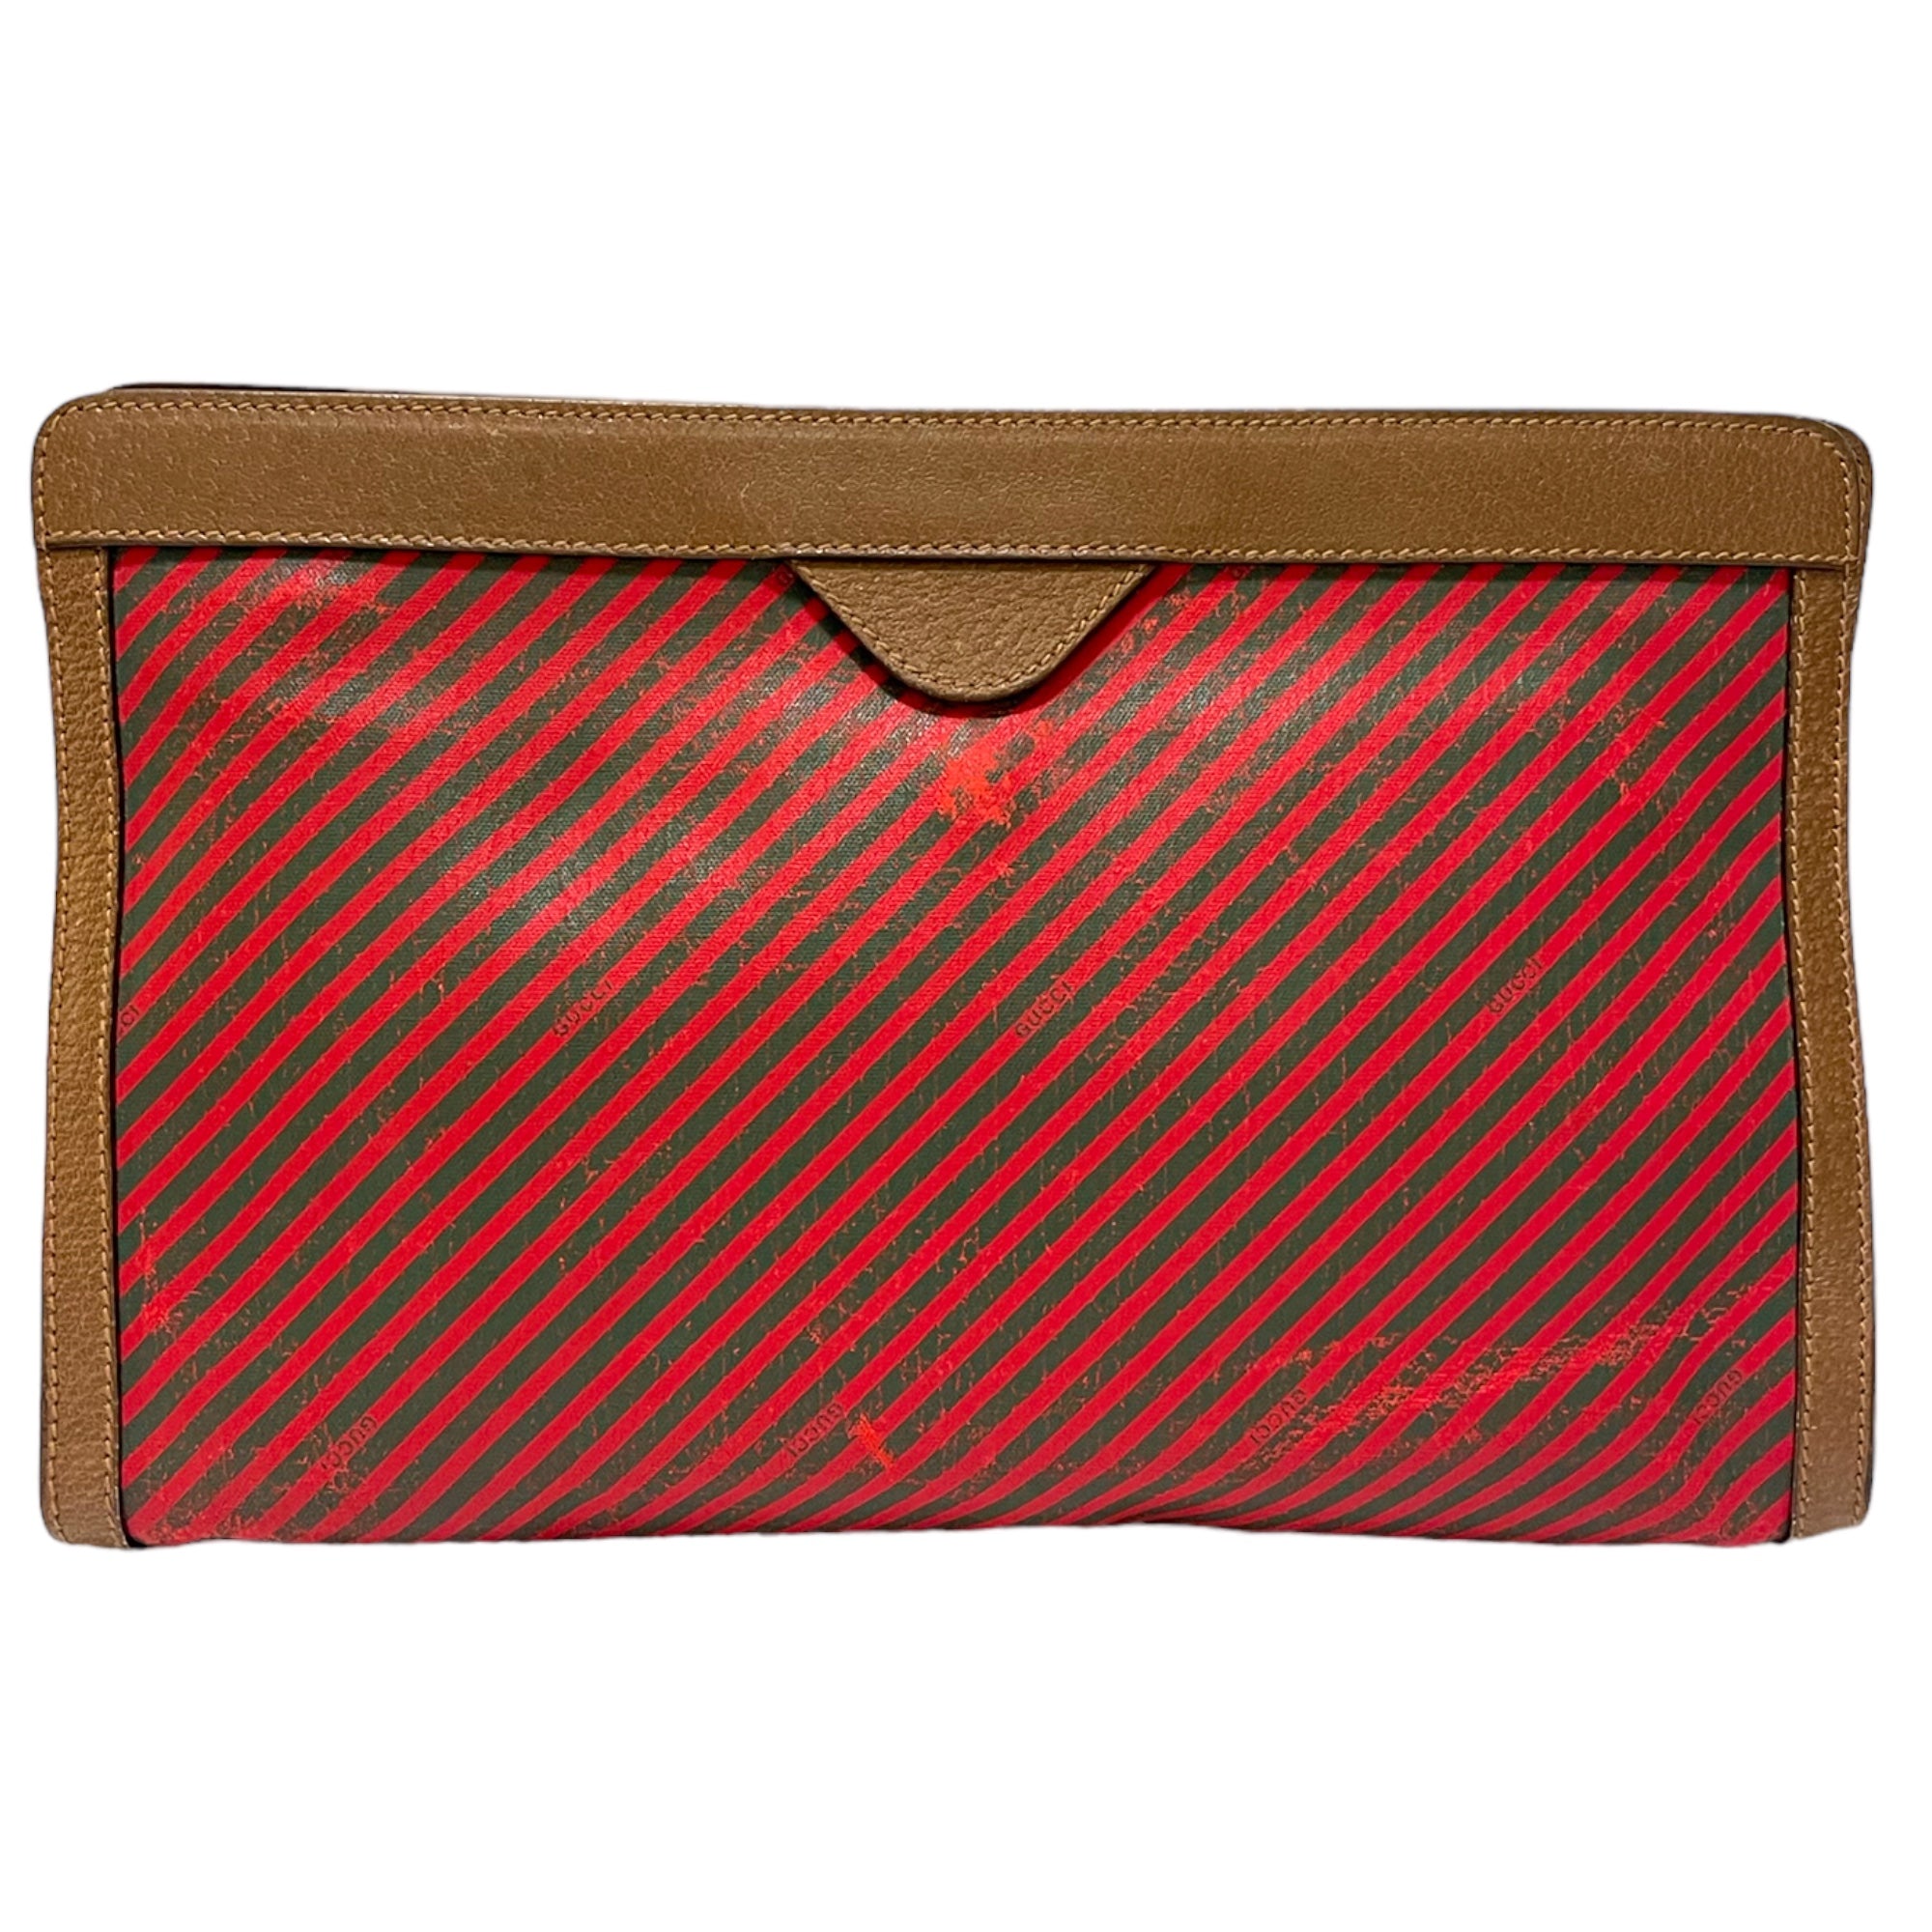 GUCCI Vintage Green & Red Classic Web Motif Print Pouch with Leather Trim